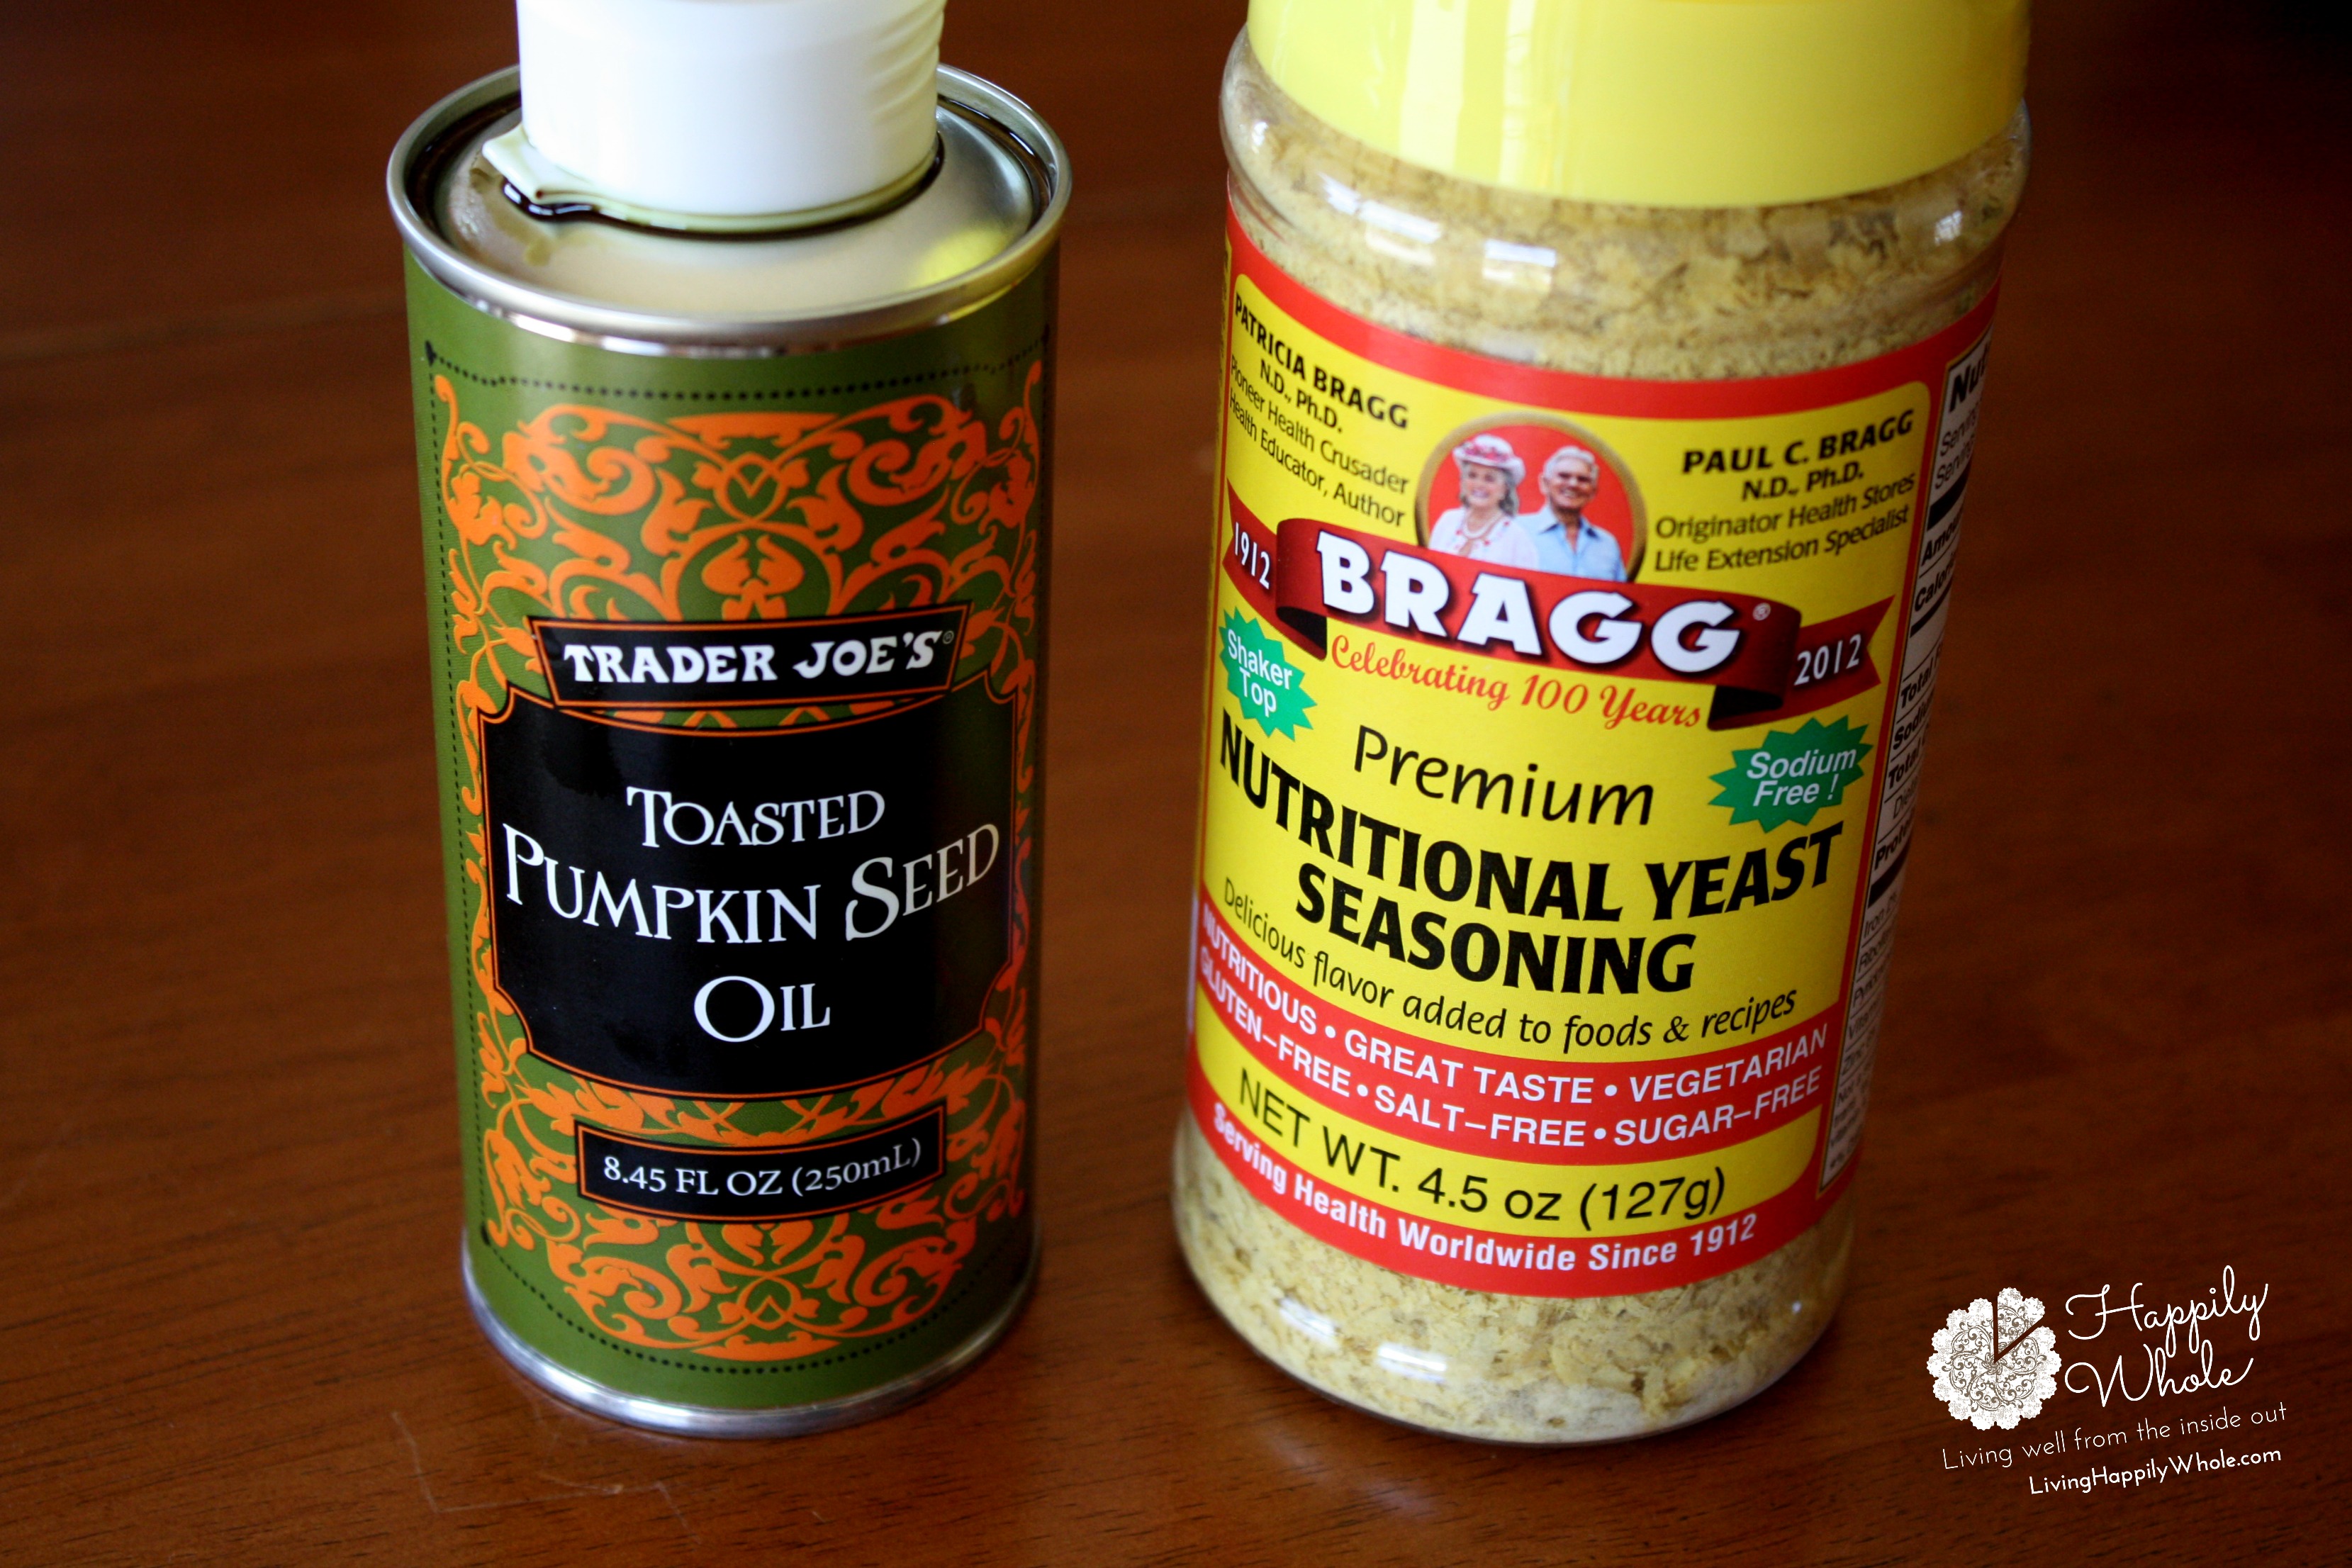 Nutritional yeast and toasted pumpkin seed oil